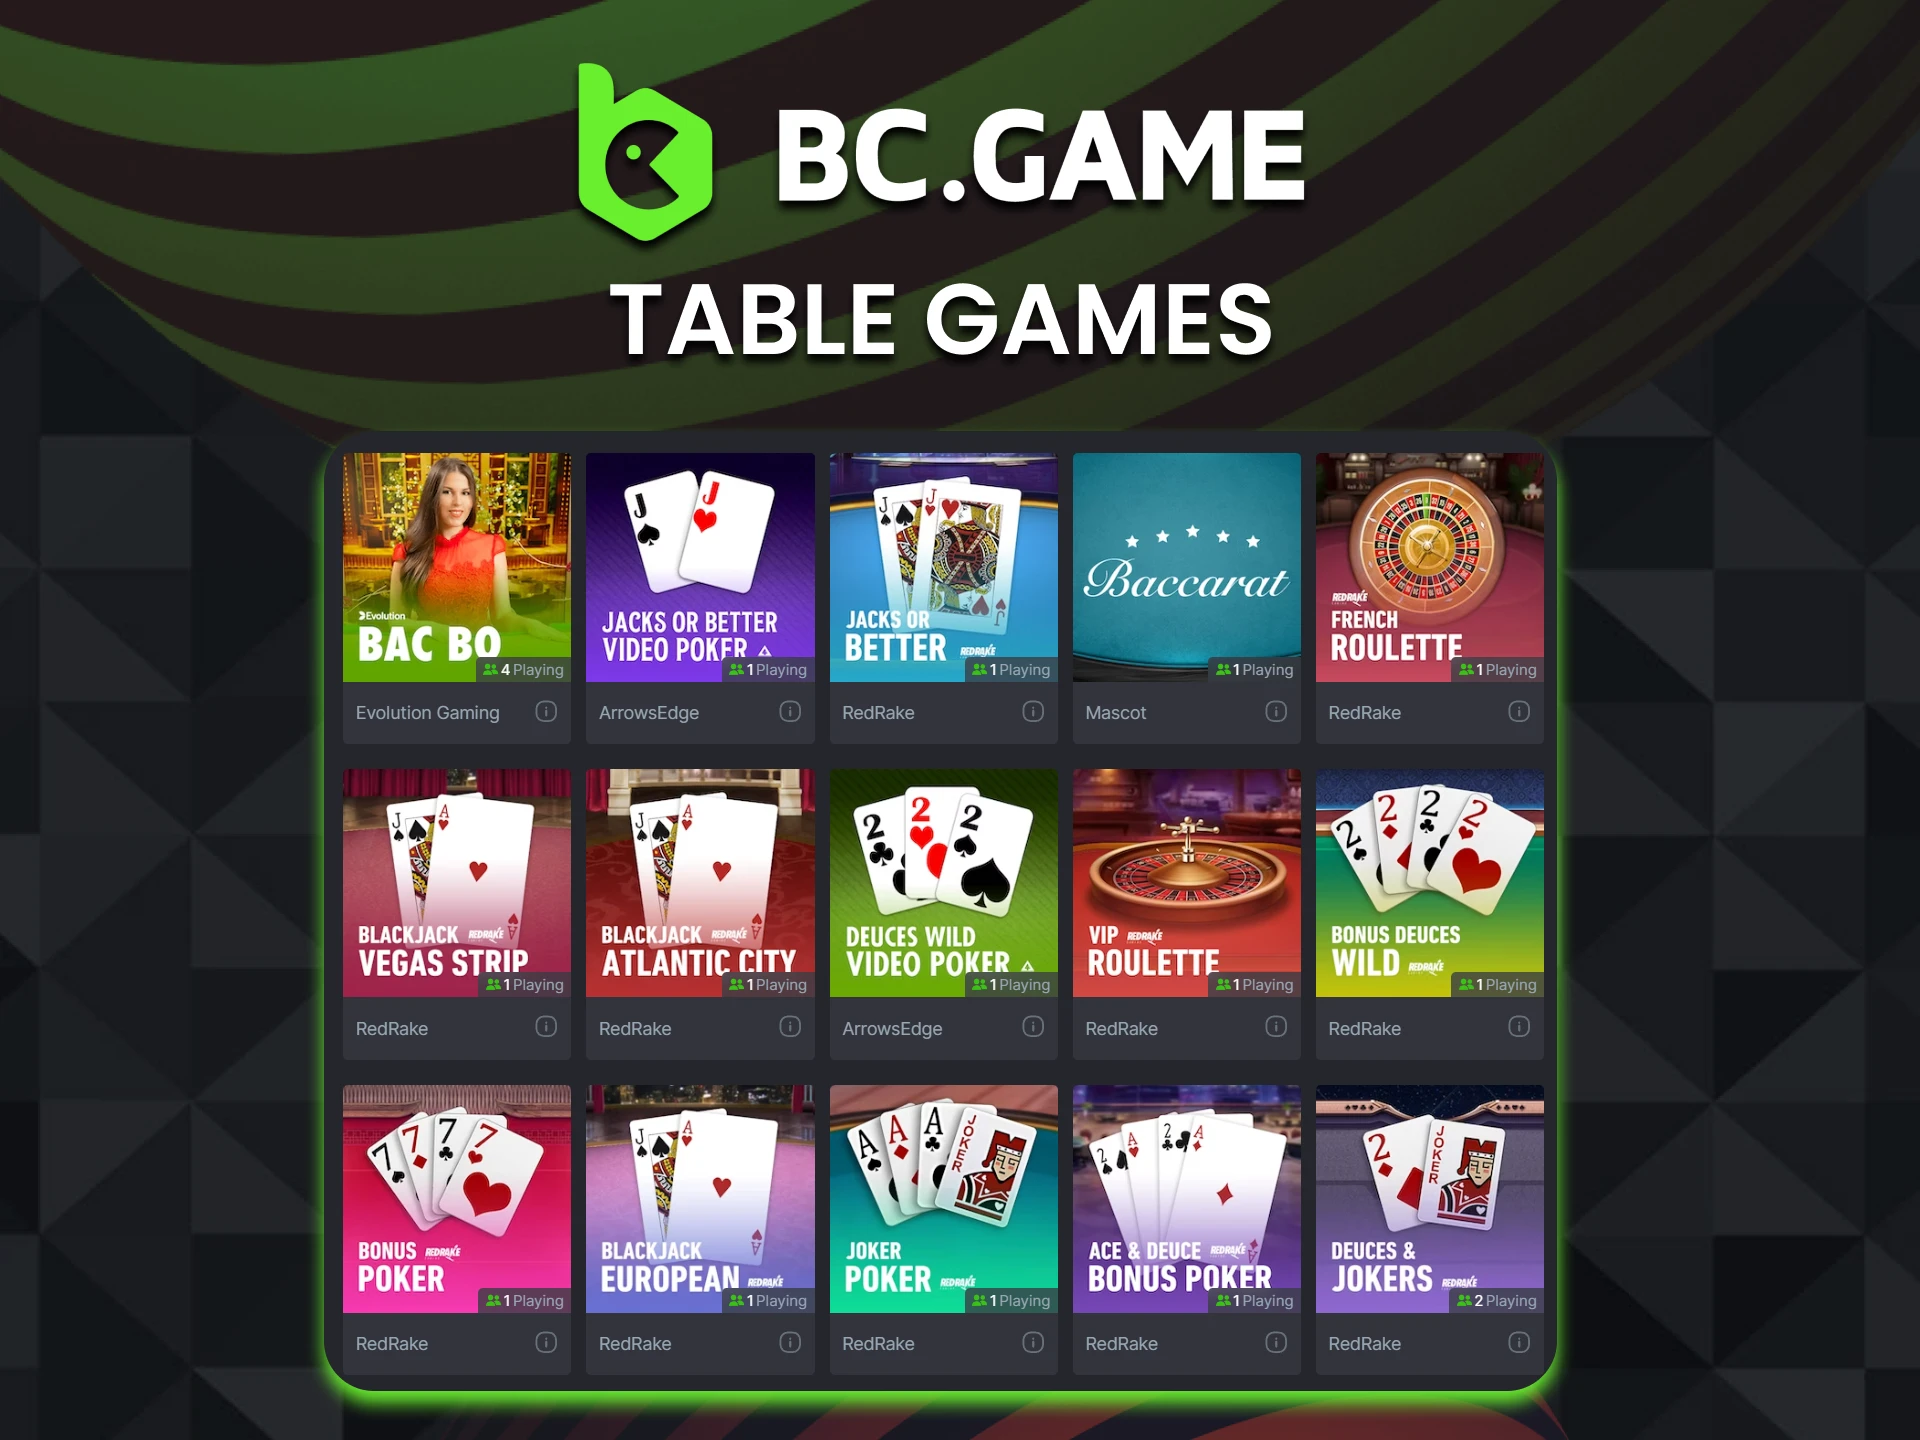 BC Game online casino offers over 350 varieties of Table games.